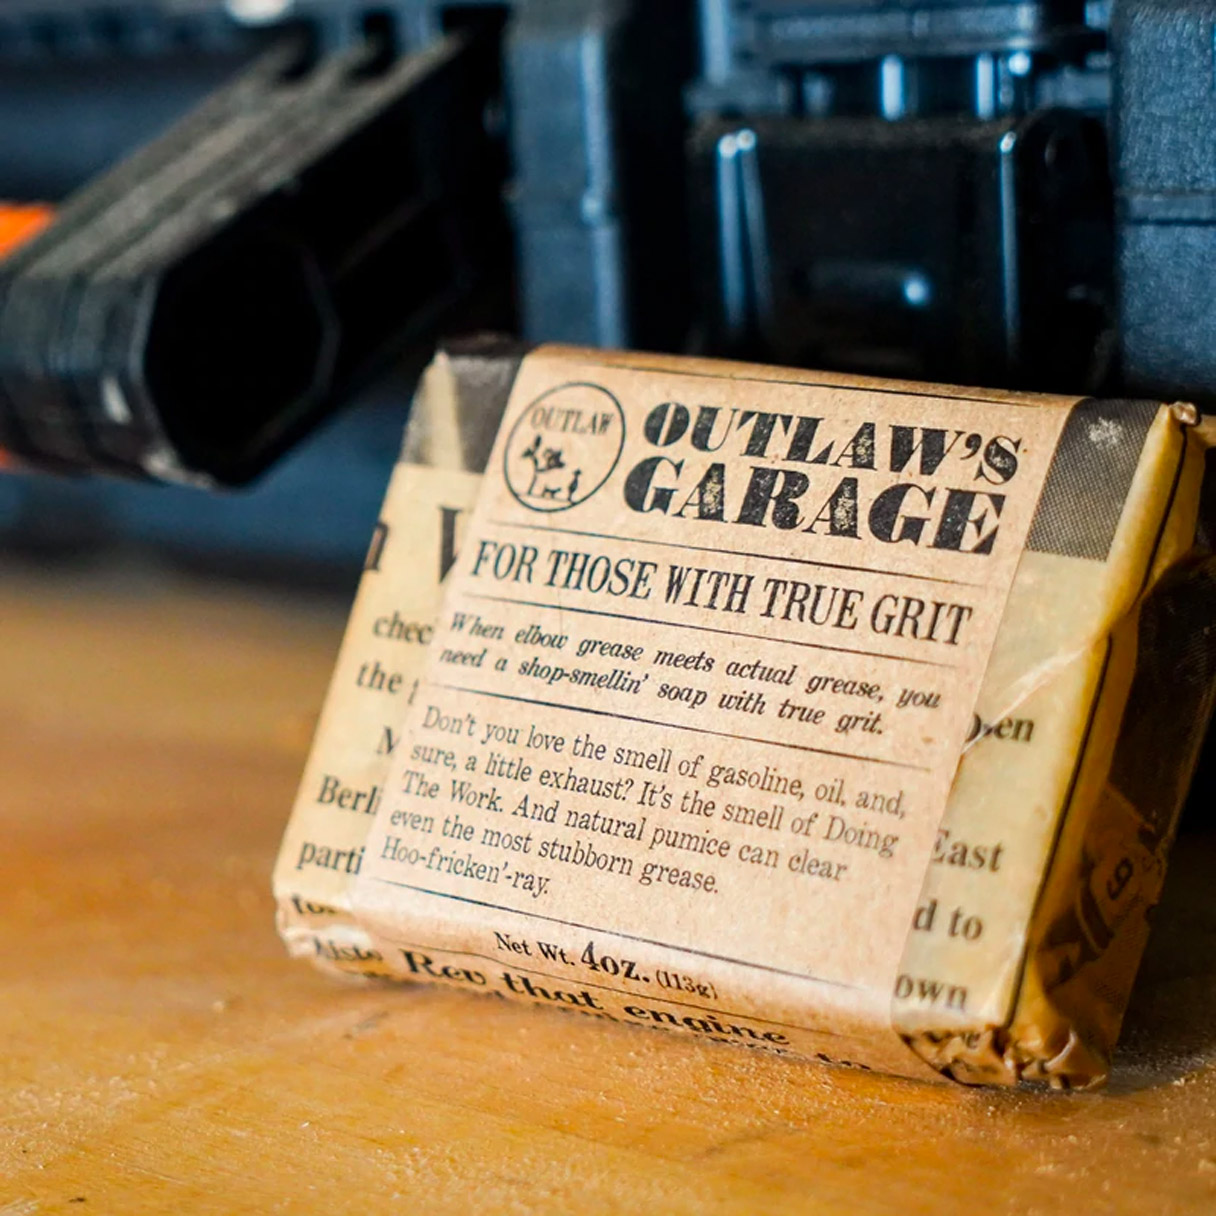 Soap That Makes You Smell Like a garage (gasoline, oil, exhaust)